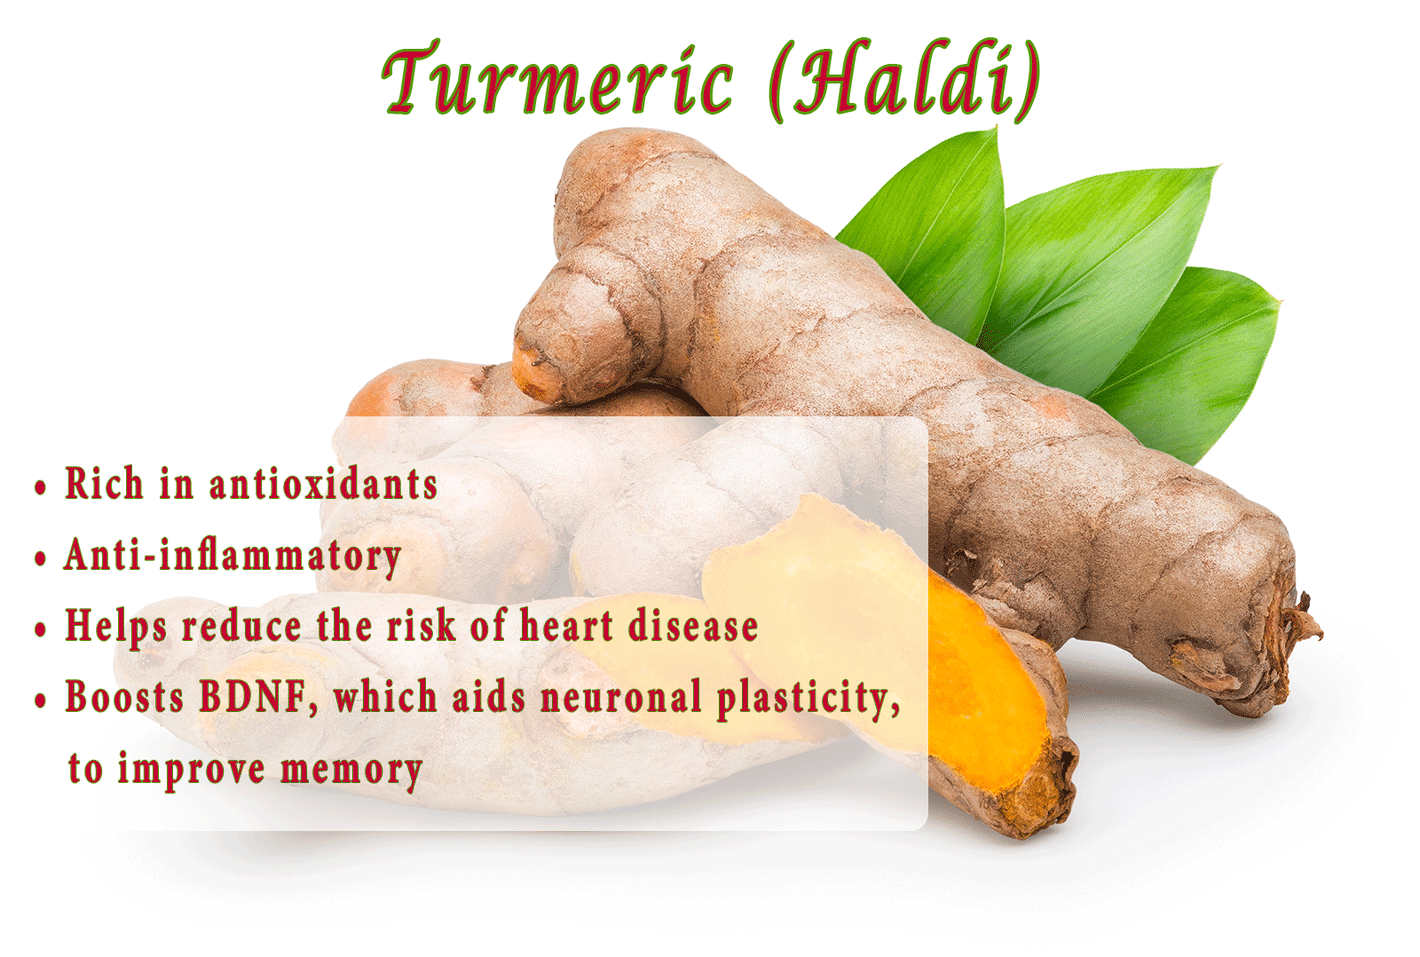 Turmeric (Haldi) •	Rich in antioxidants •	Anti-inflammatory •	Helps reduce the risk of heart disease •	Shown to stop the growth of tumor cells •	Boosts BDNF, which aids neuronal plasticity, to improve memory